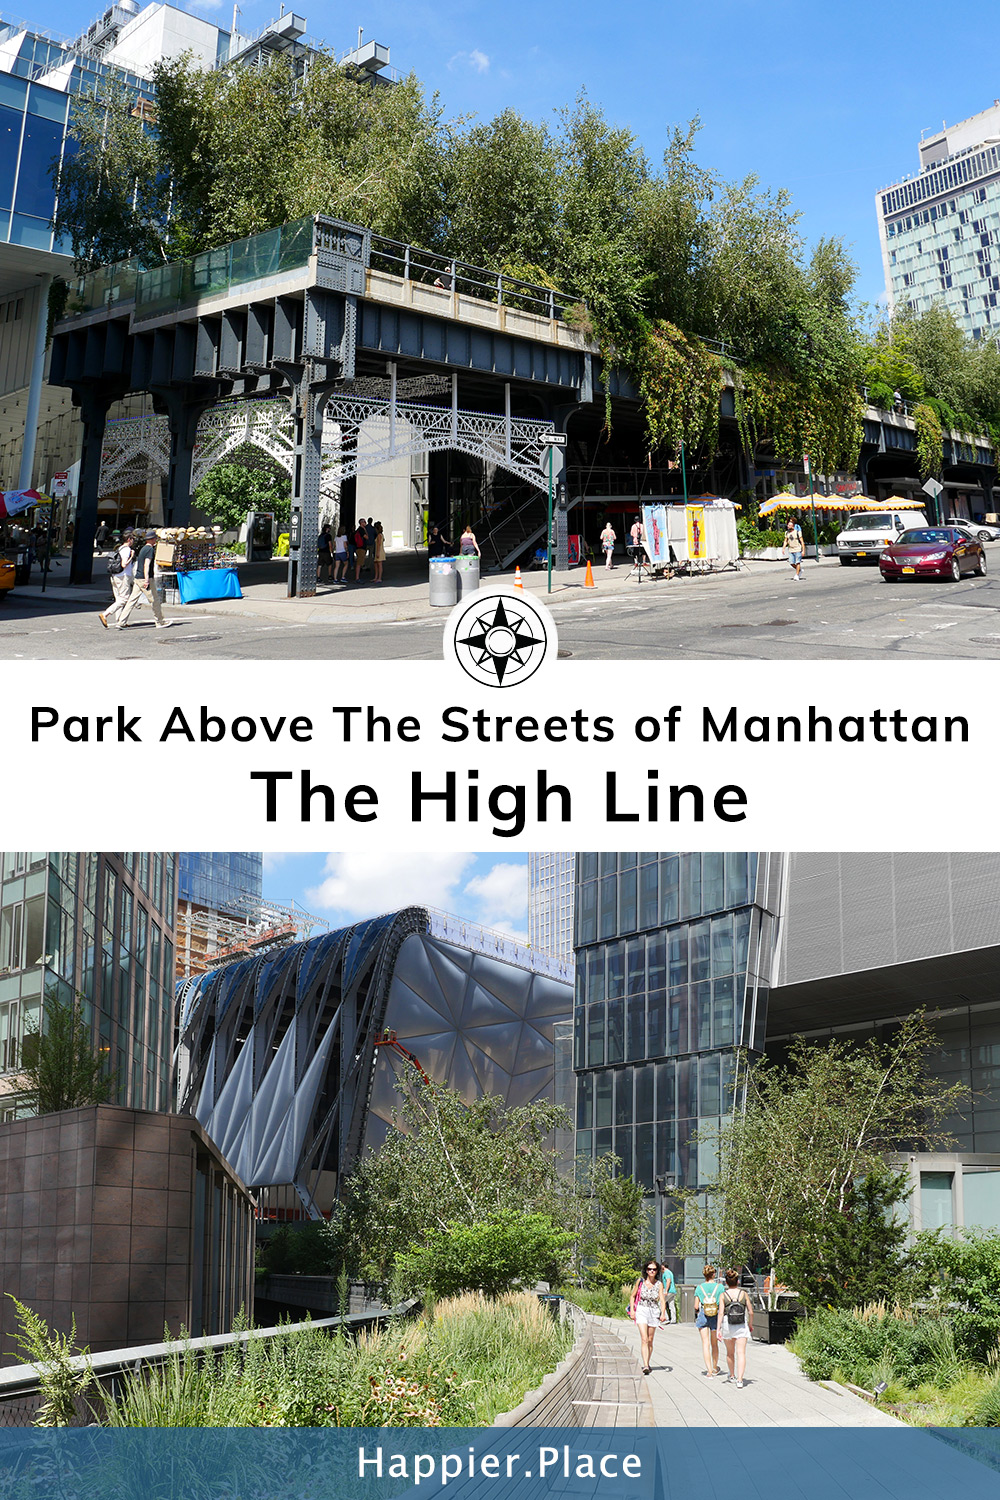 Park Above The Streets of Manhattan: The High Line - Elevated Park Greenwich to Hudson Yards